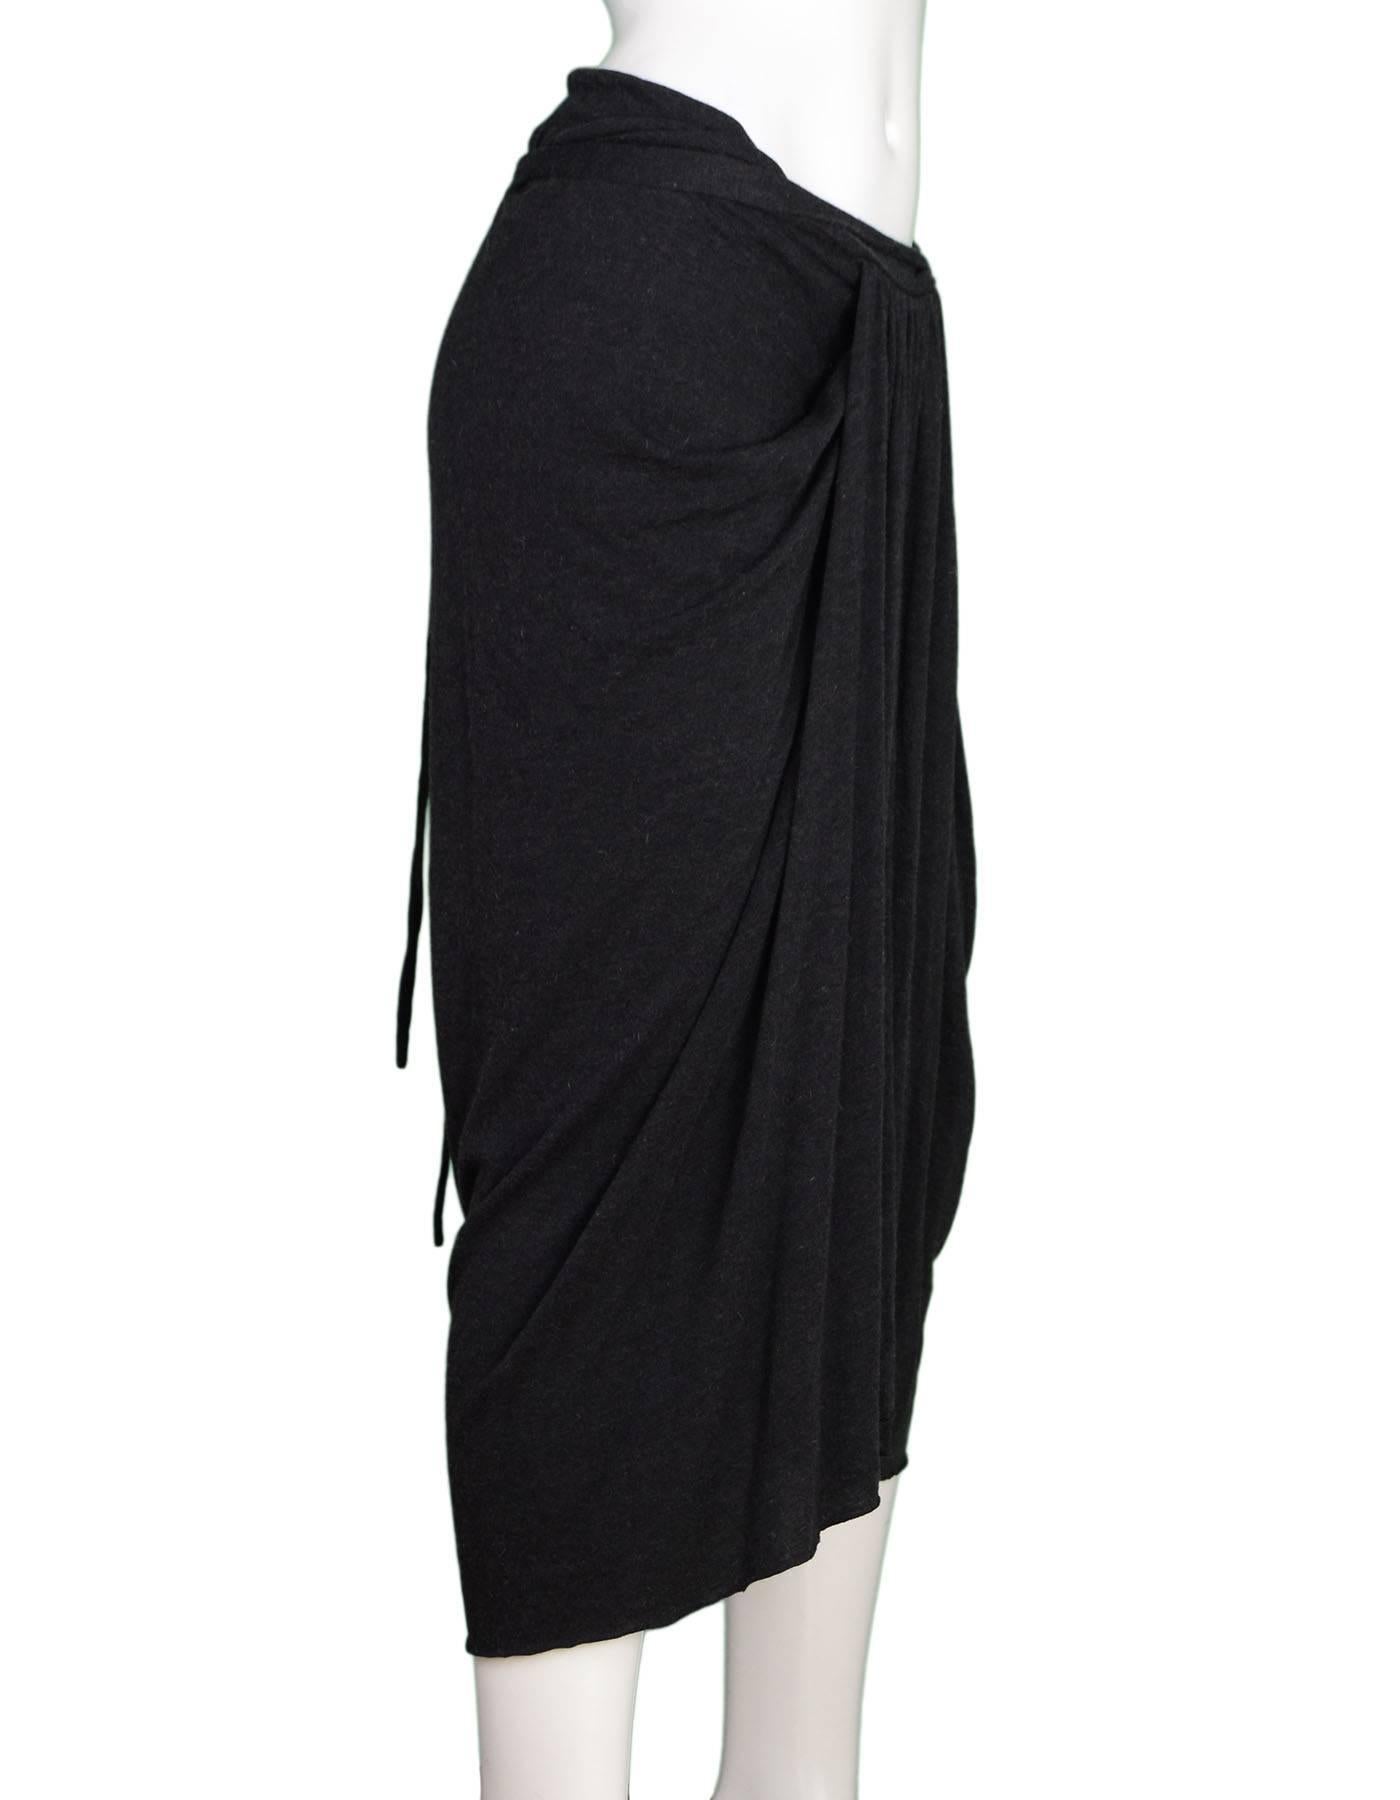 Rick Owens NEW Grey Draped Front Skirt 
Features waist tie

Made In: France
Color: Charcoal grey
Composition: 30% nylon, 30% viscose, 20% angora, 20% wool
Lining: None
Closure/Opening: Pull on
Exterior Pockets: None
Interior Pockets: